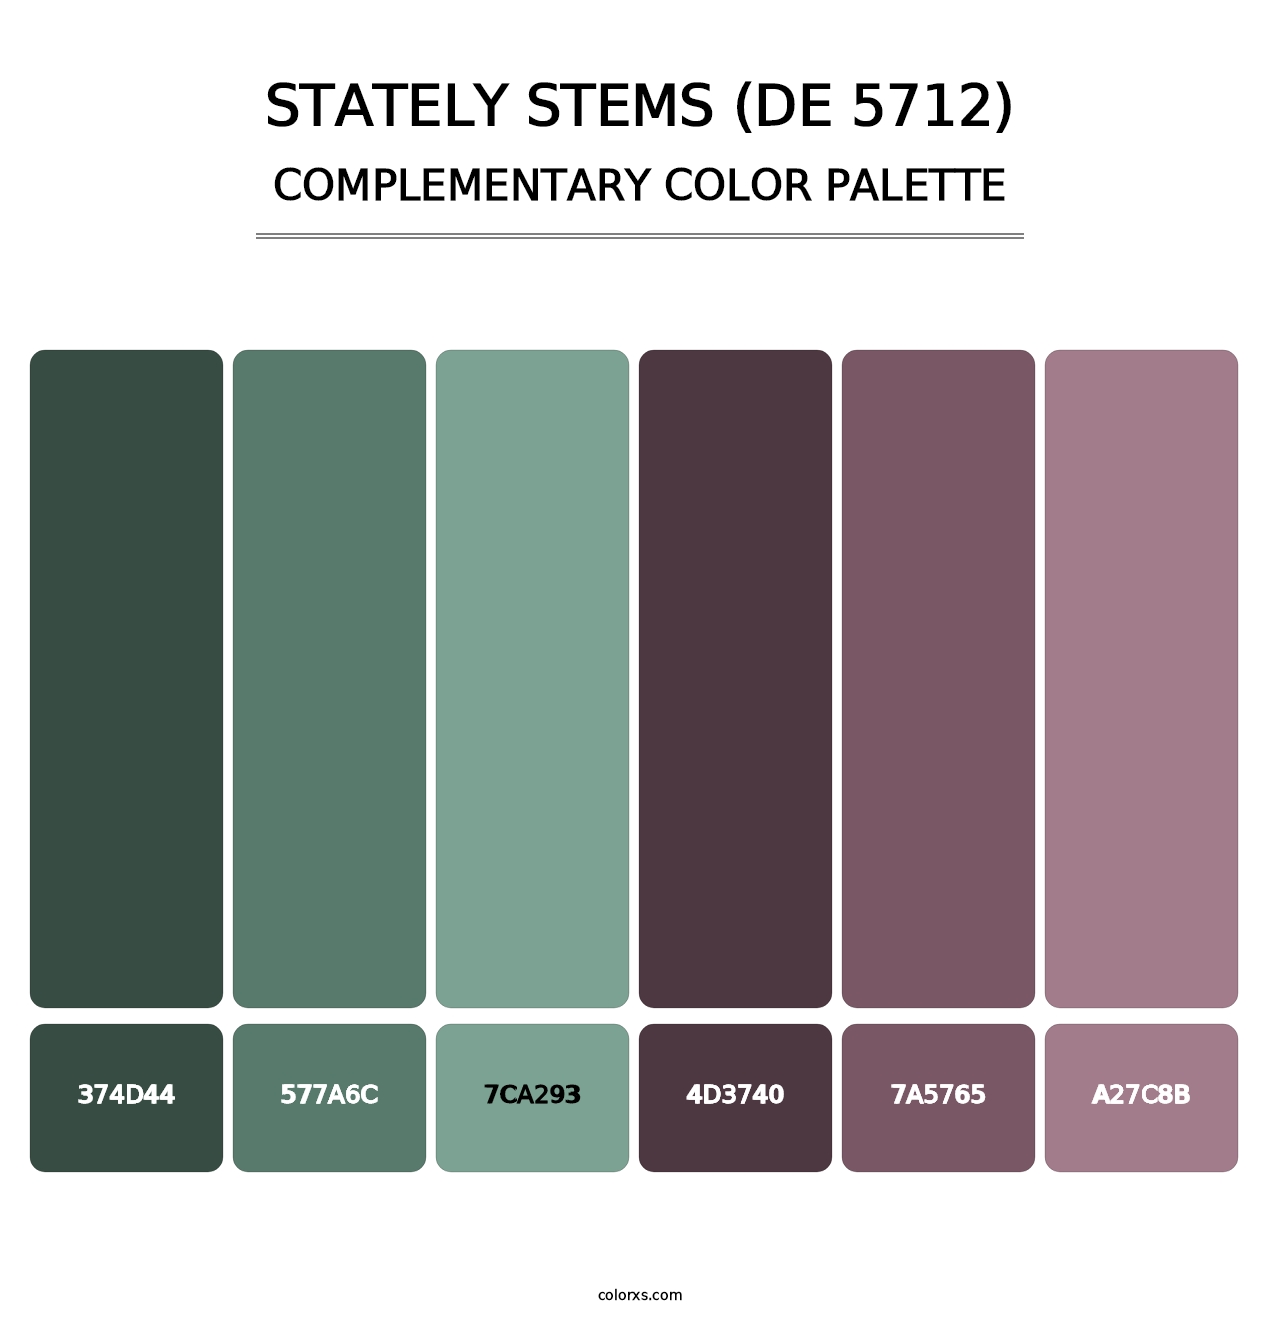 Stately Stems (DE 5712) - Complementary Color Palette